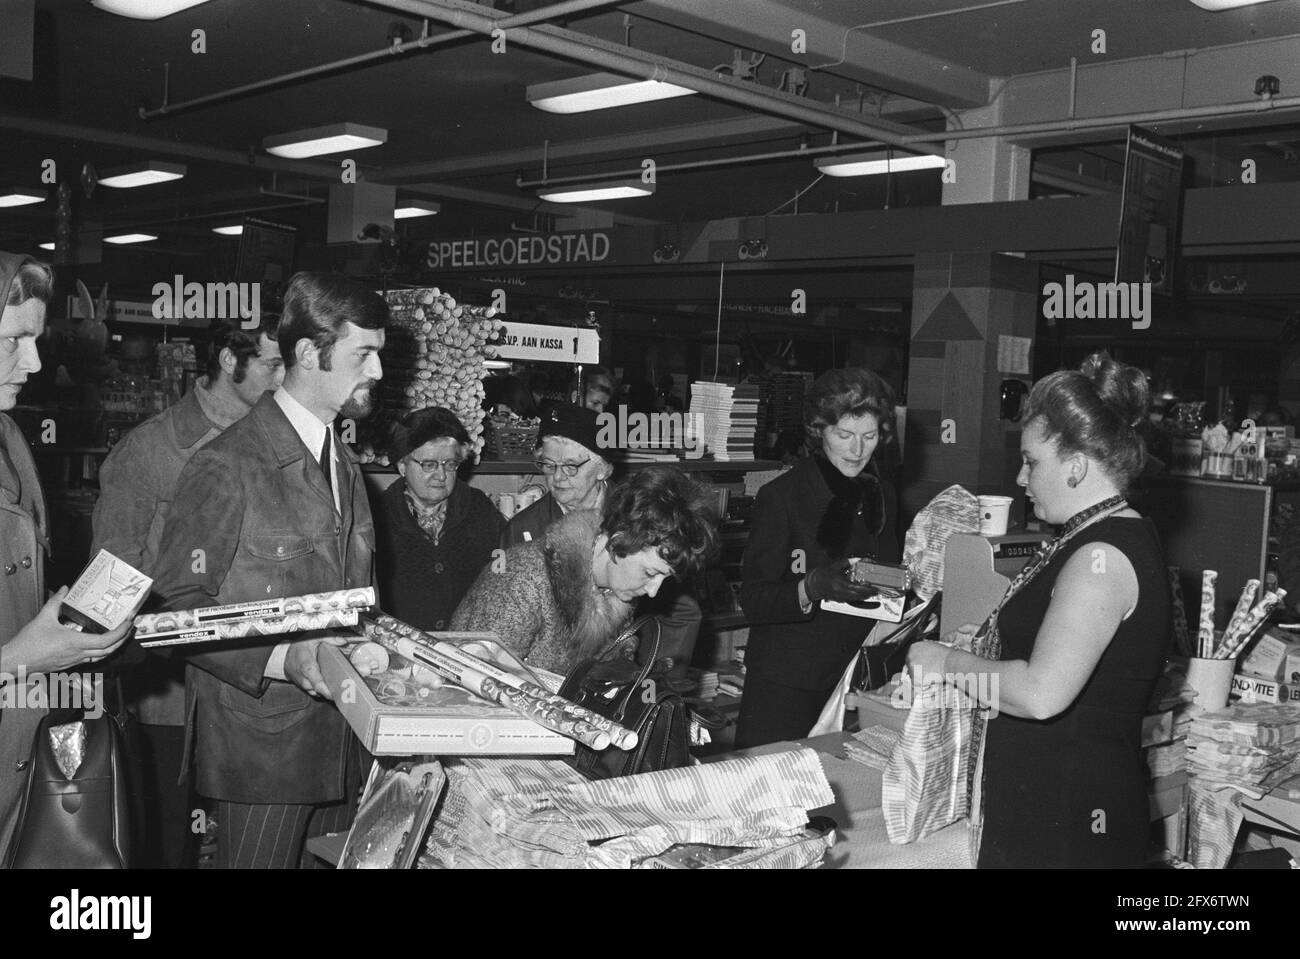 Housewives do Sinterklaas shopping, Amsterdam; crowds at cash register, December 2, 1970, HOUSEWOMEN, KASSAS, The Netherlands, 20th century press agency photo, news to remember, documentary, historic photography 1945-1990, visual stories, human history of the Twentieth Century, capturing moments in time Stock Photo